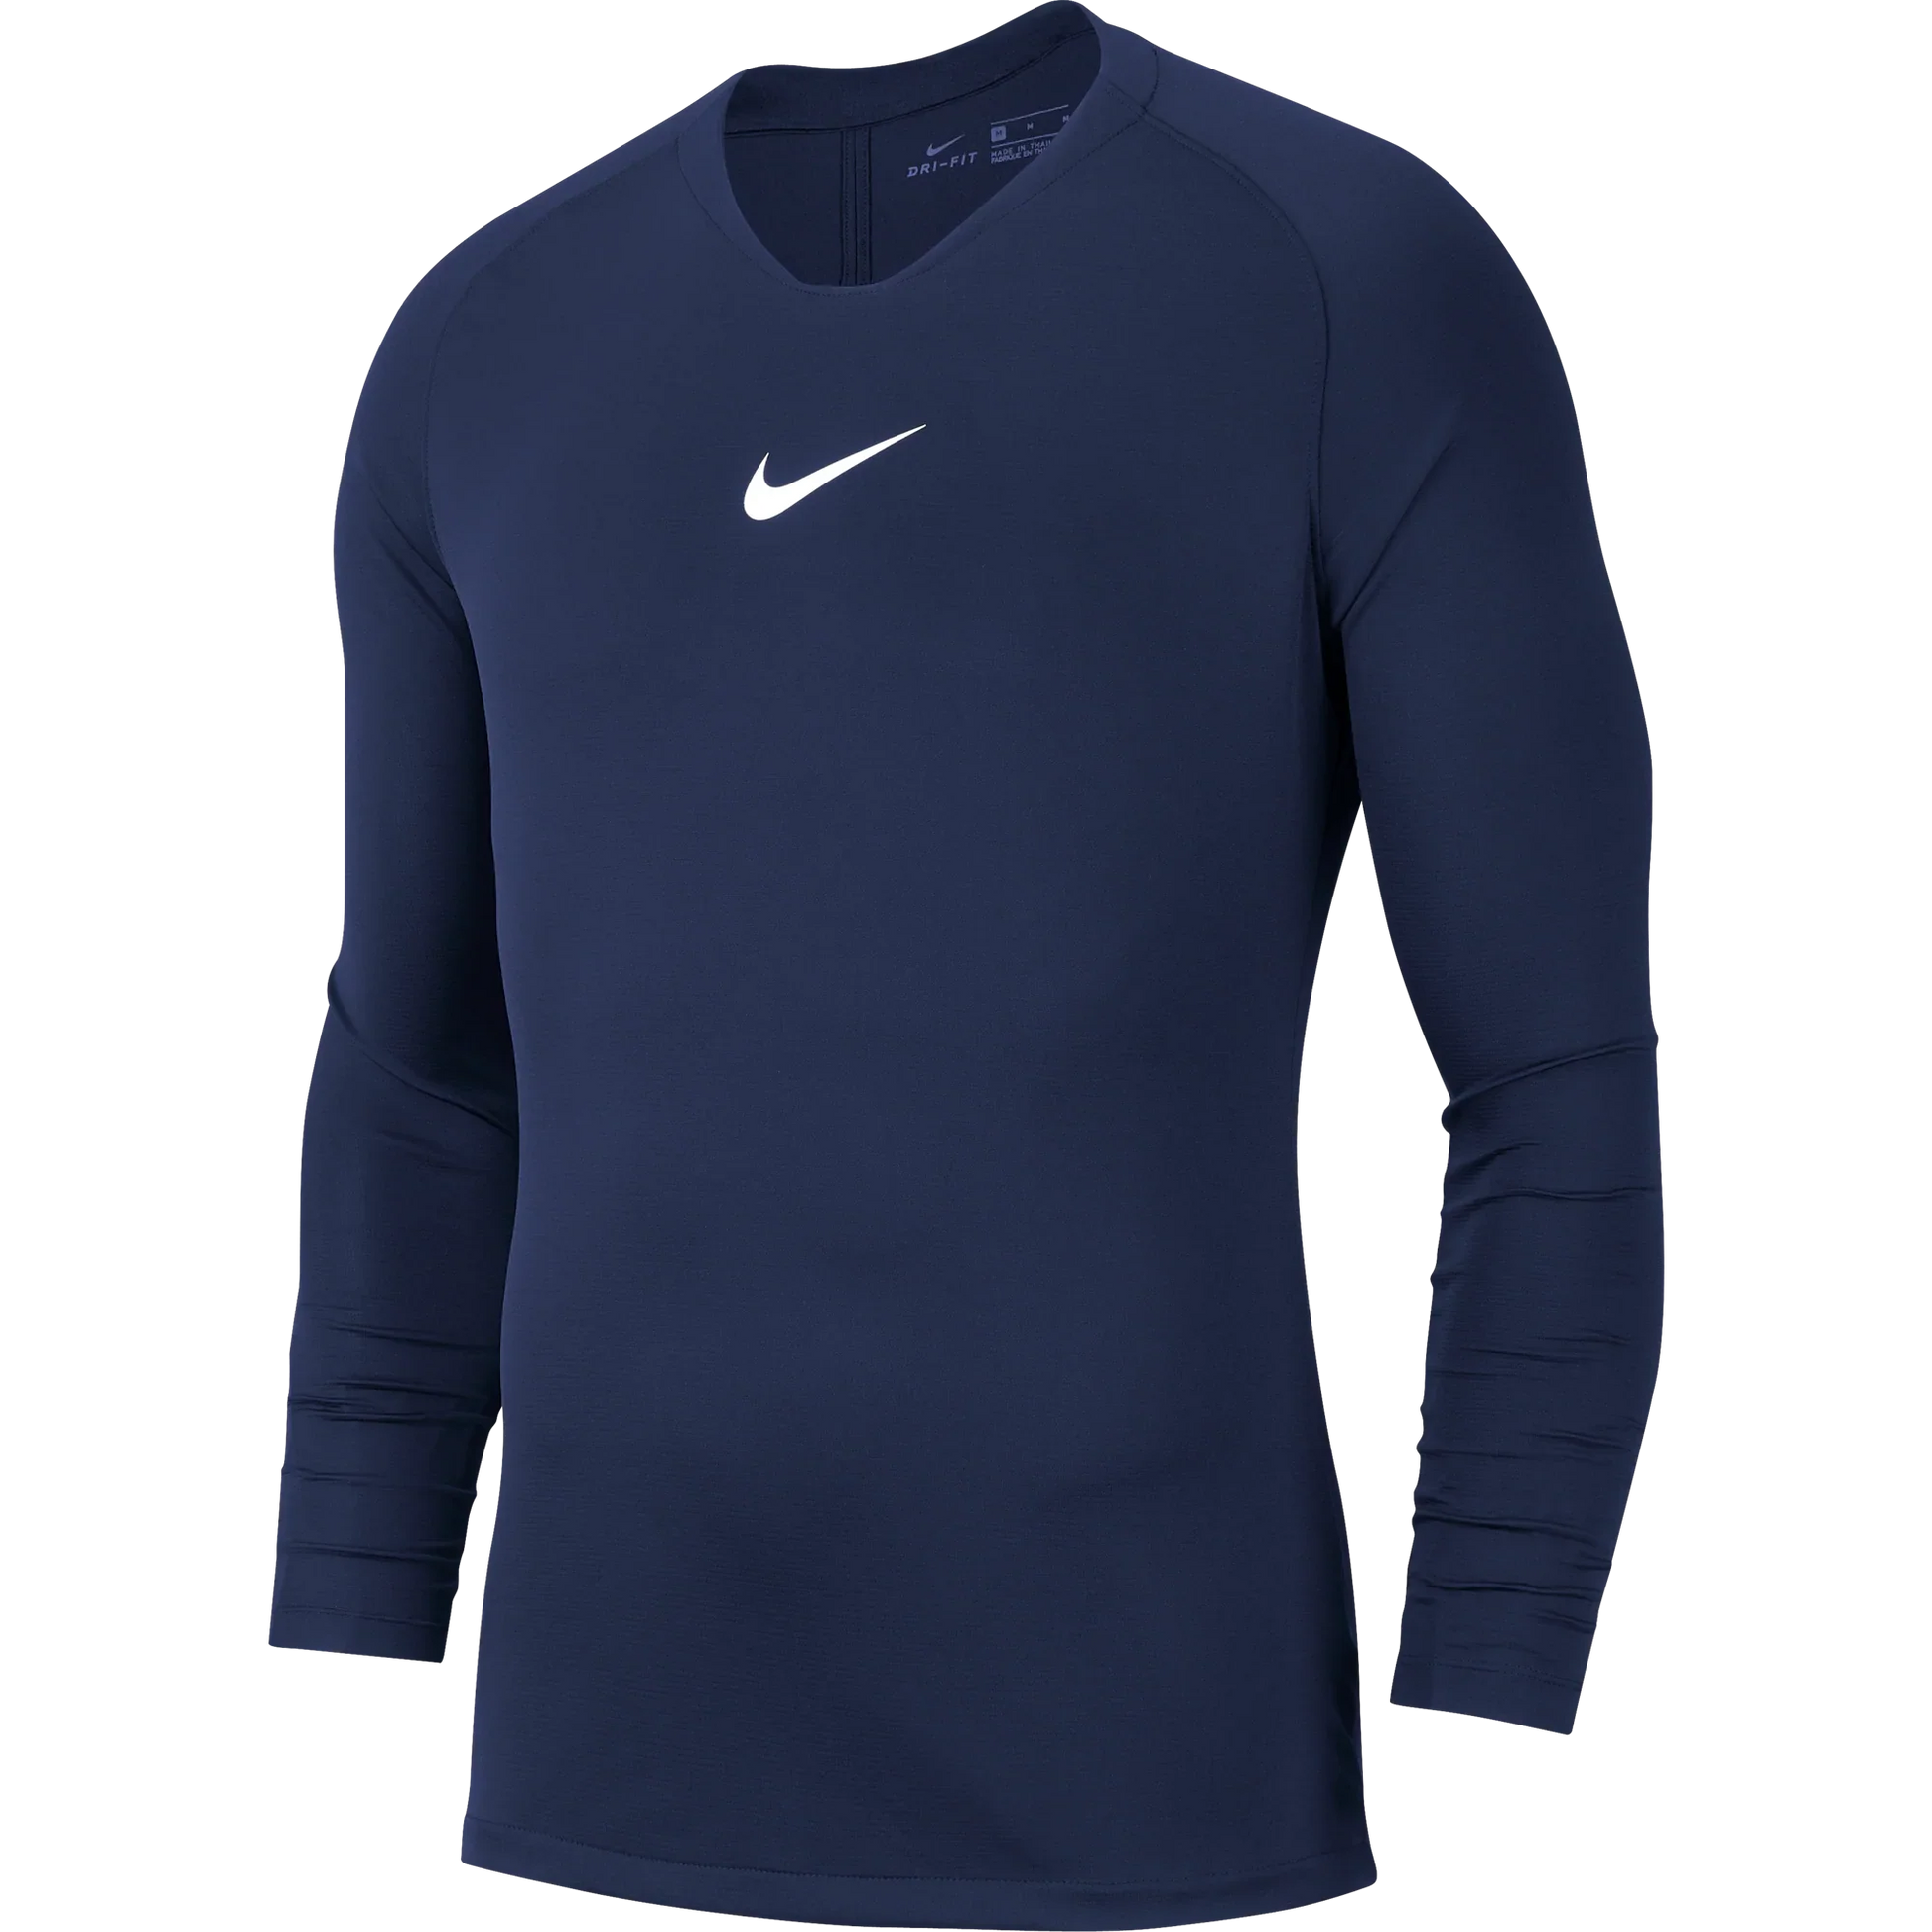 PARK FIRST LAYER (Long Sleeve Youth) - Fanatics Supplies